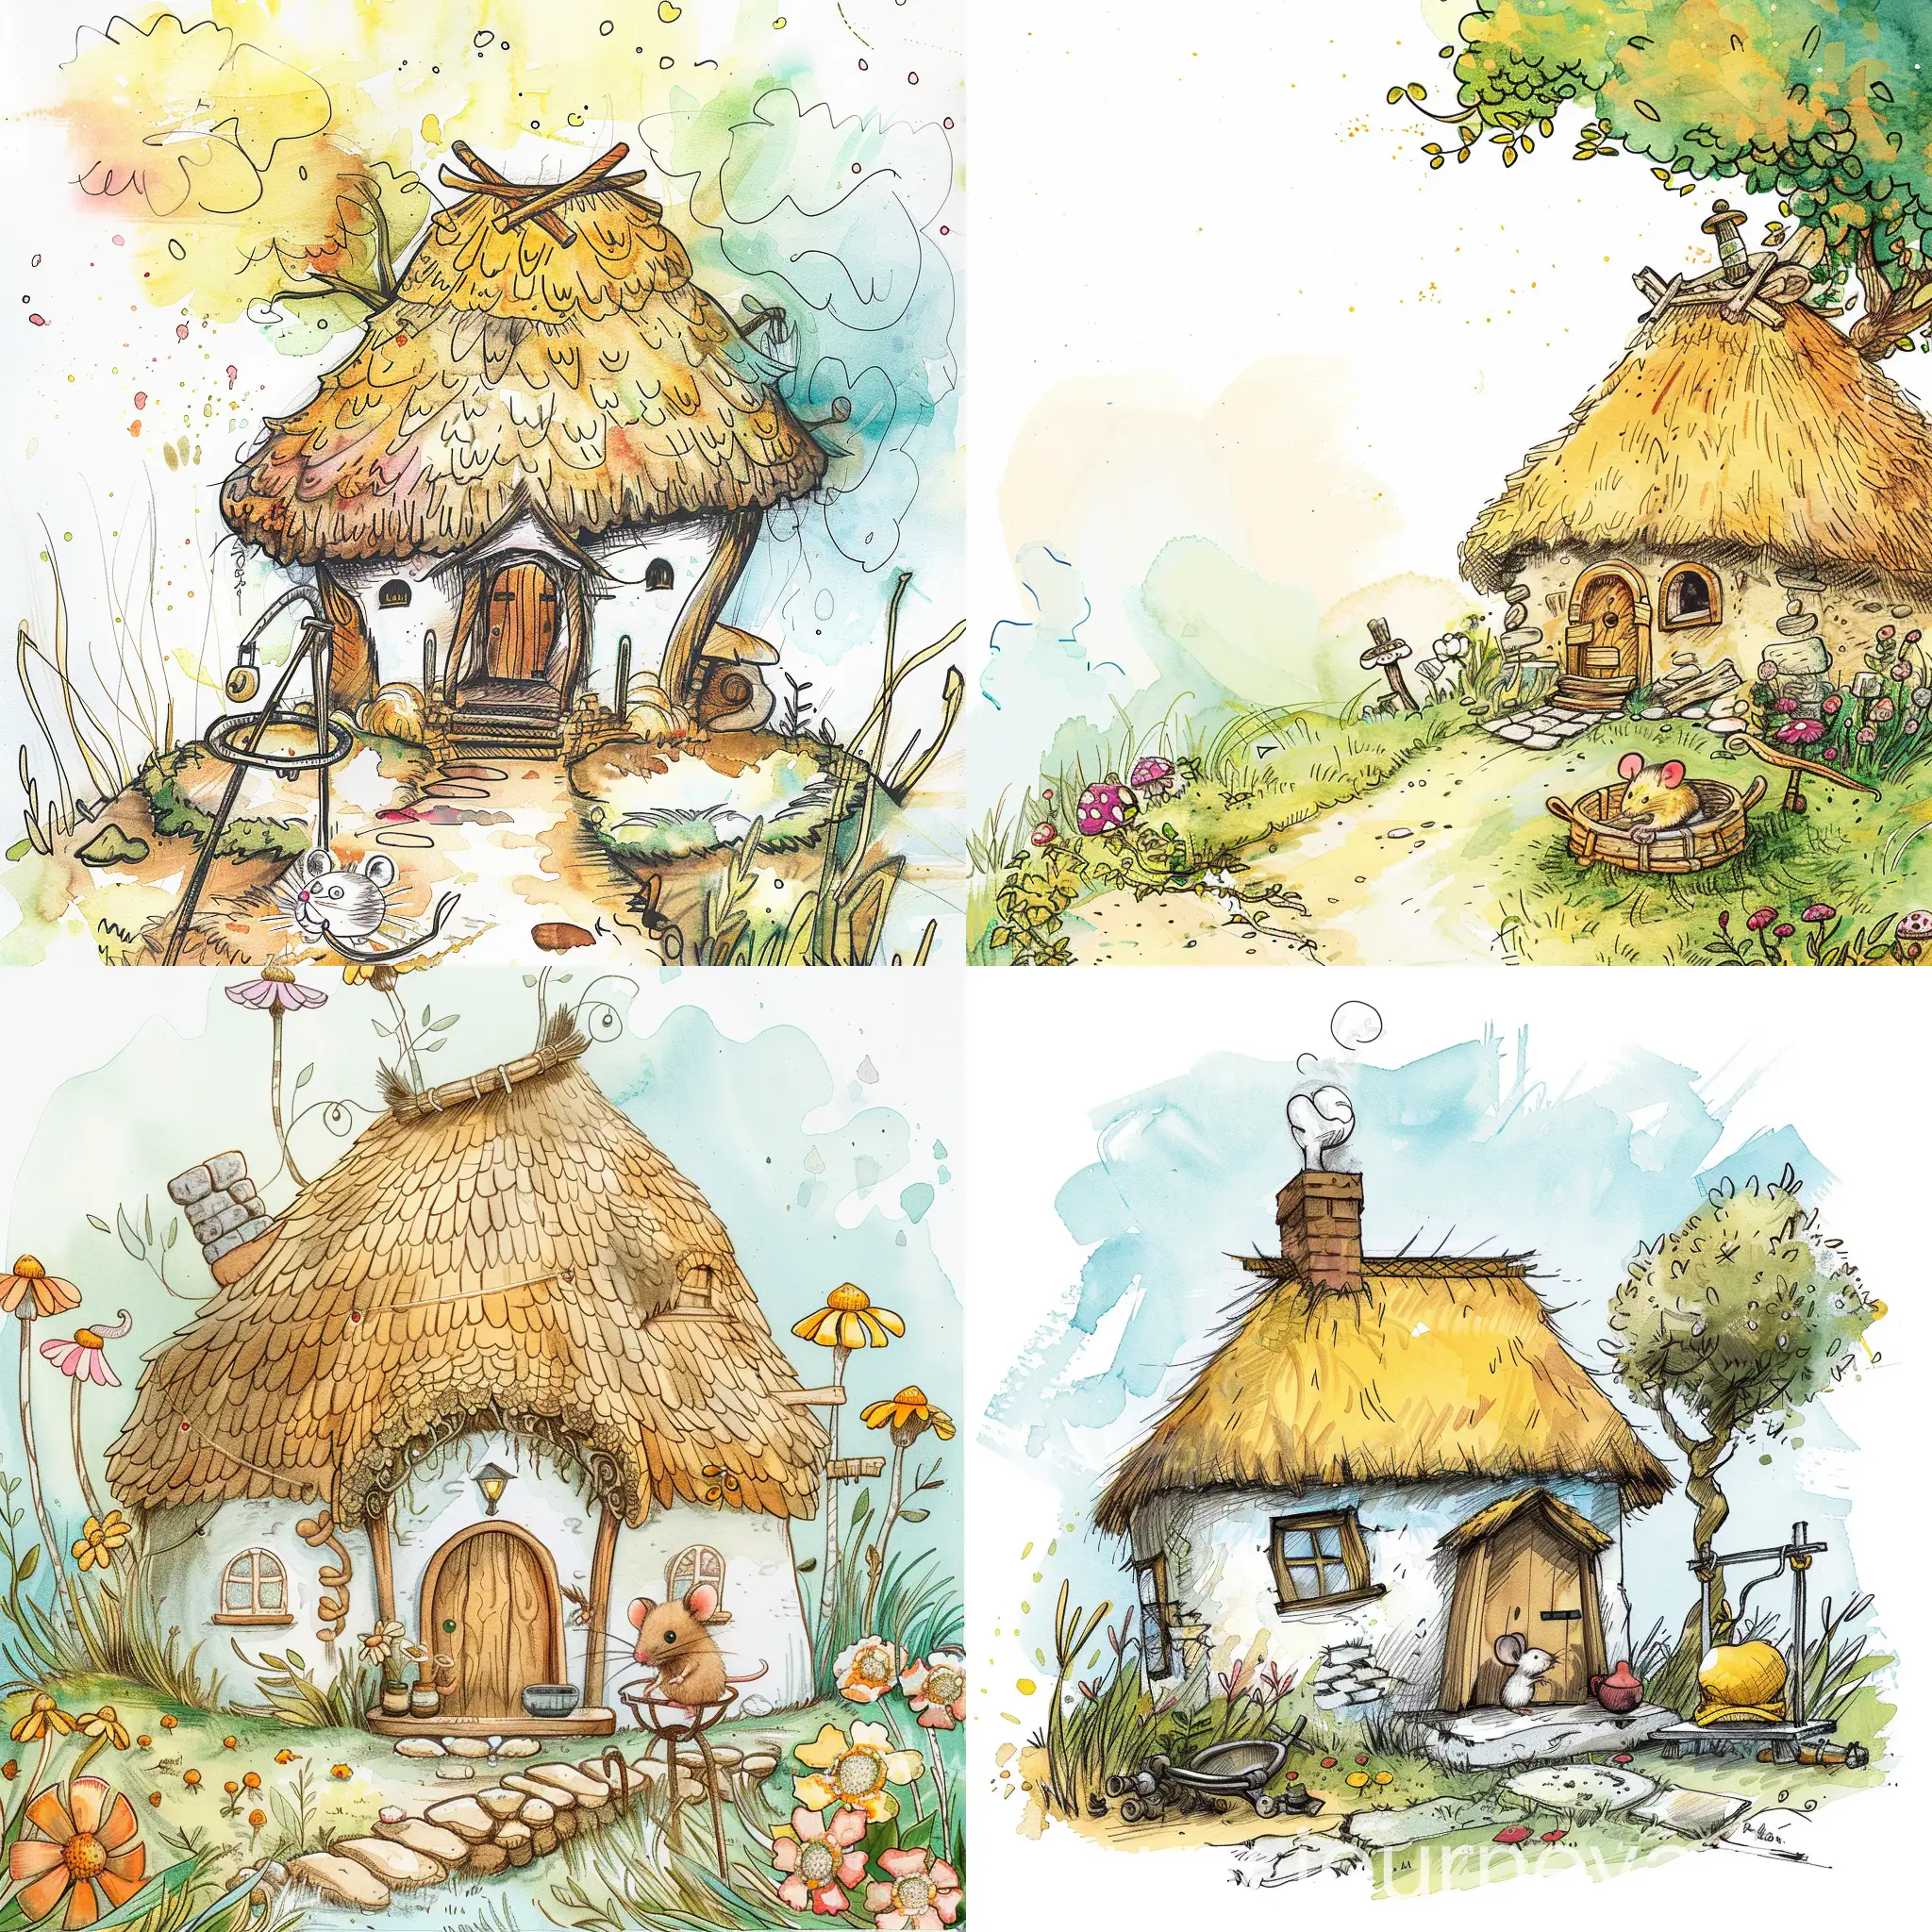 Inspired by fairy tales, this minimalist drawing sketch features a thatched house, a mouse in a trap (the focus), a colourful background design and whimsical characters to catch the eye and spark the imagination of young readers. Simple, Illustration, Watercolour, Rough, Cute, Webtoon Style